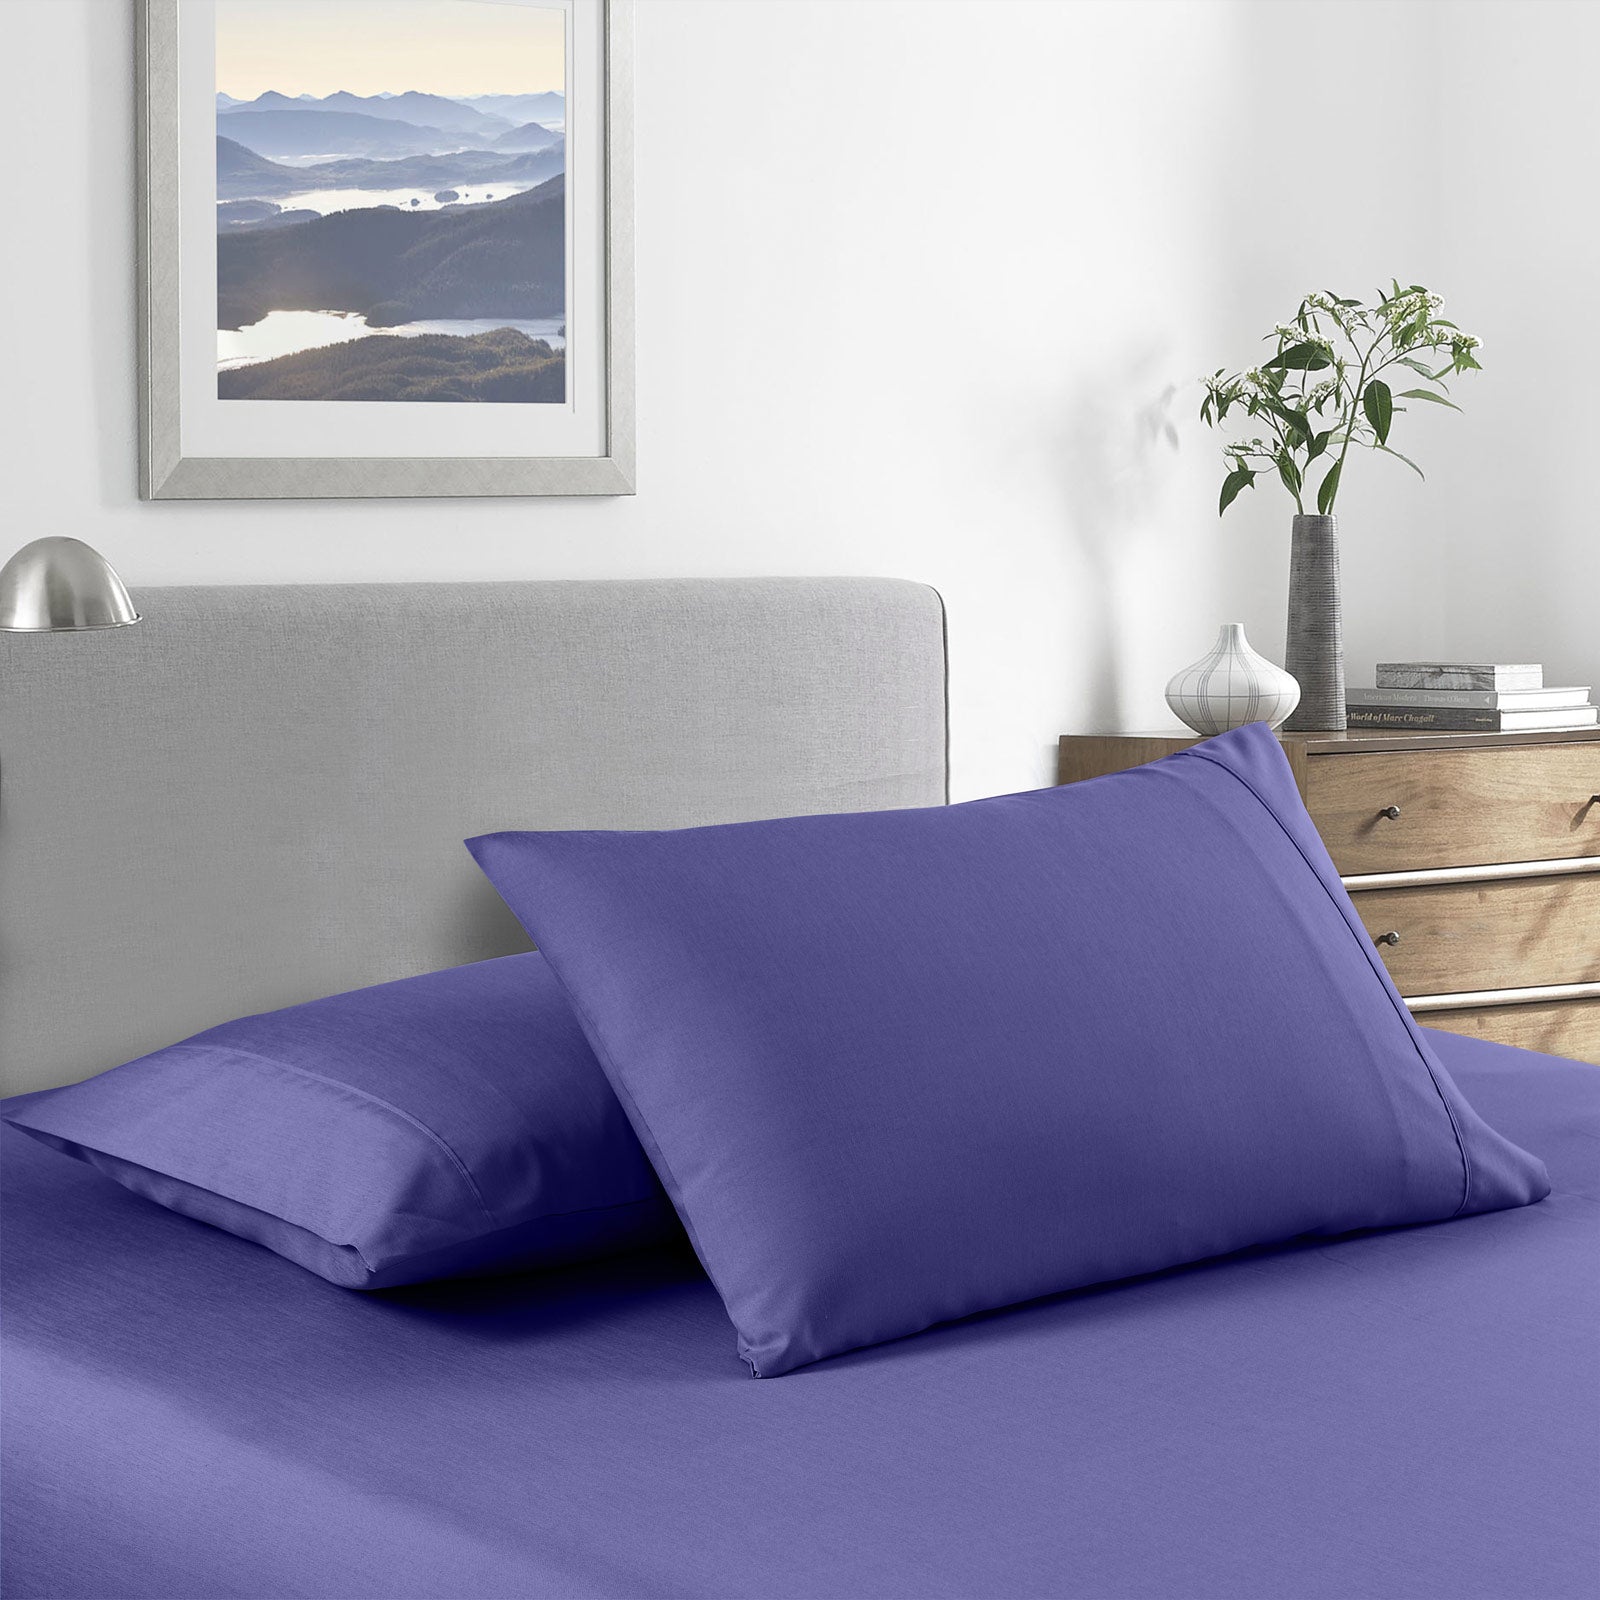 Royal Comfort 2000 Thread Count Bamboo Cooling Sheet Set Ultra Soft Bedding - Double - Royal Blue from Deals499 at Deals499